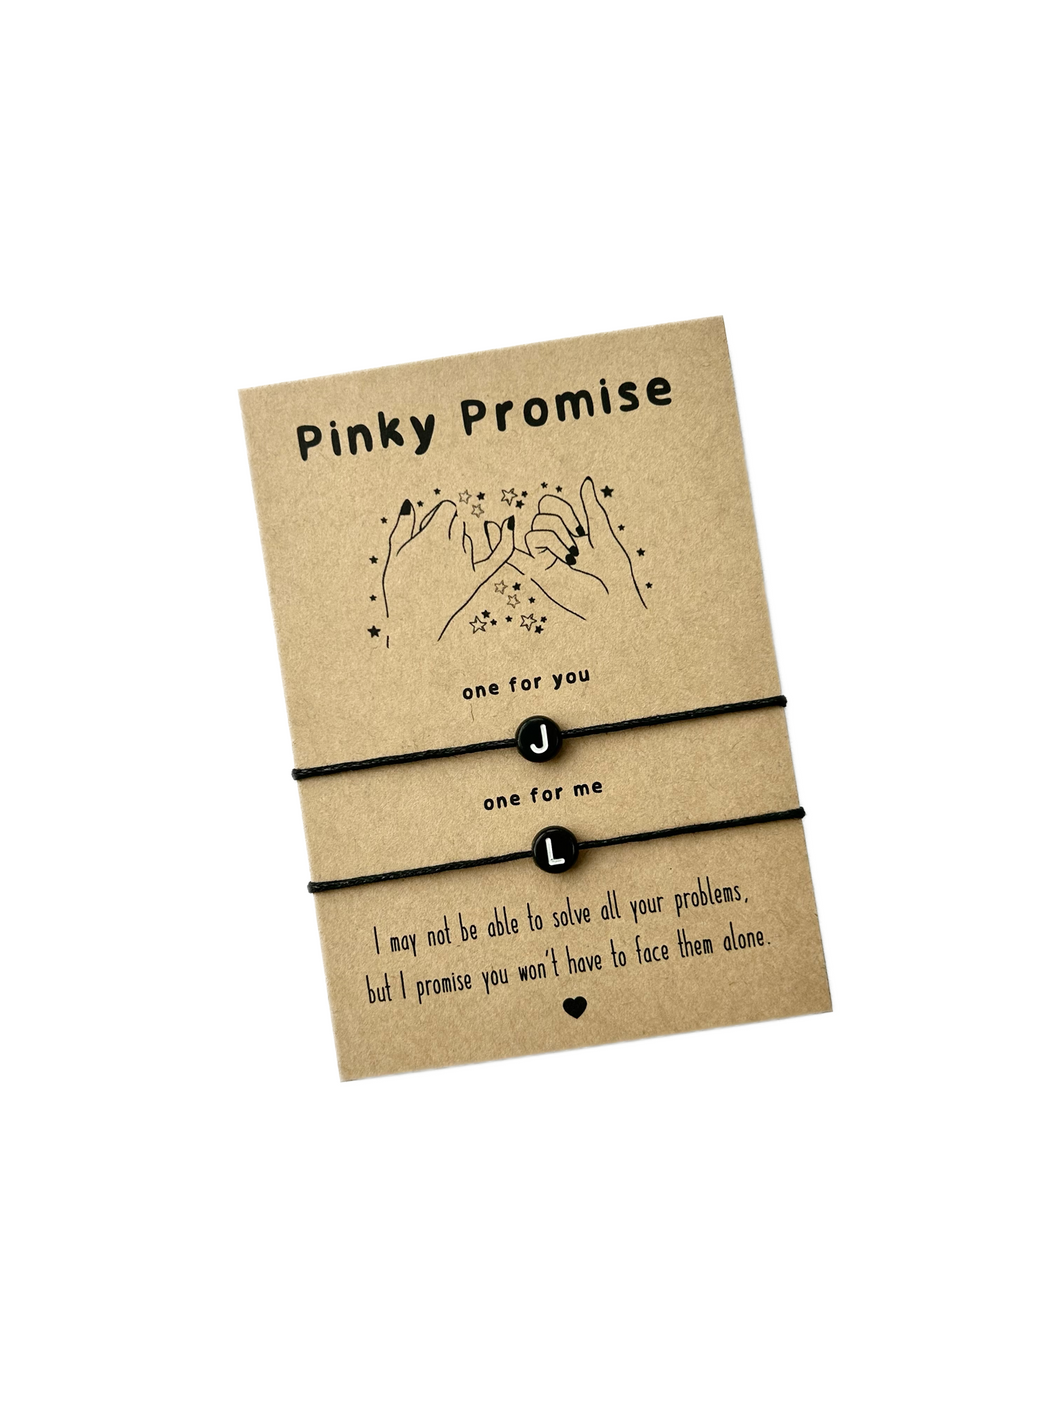 Pinky promise gift